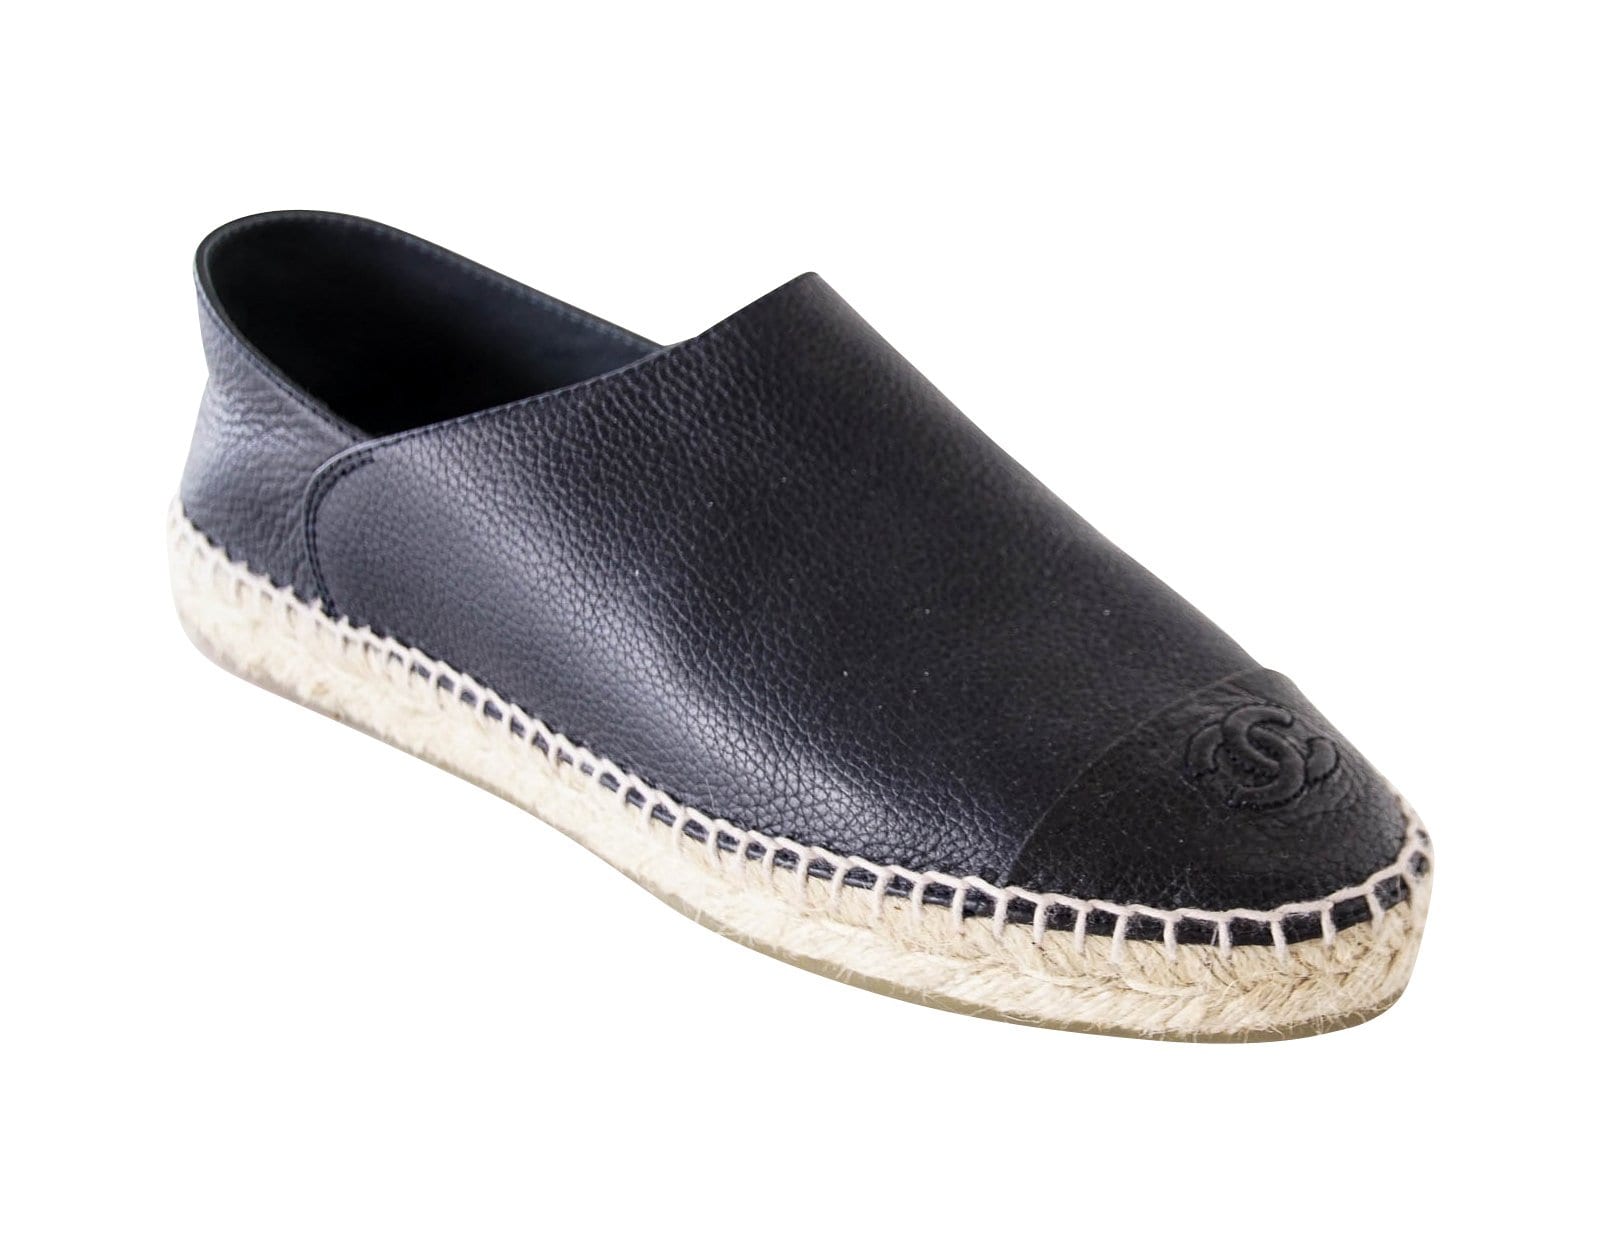 Chanel Shoe Espadrilles Cambon Loafers Dark Navy Leather 39 / 9 rare –  Mightychic